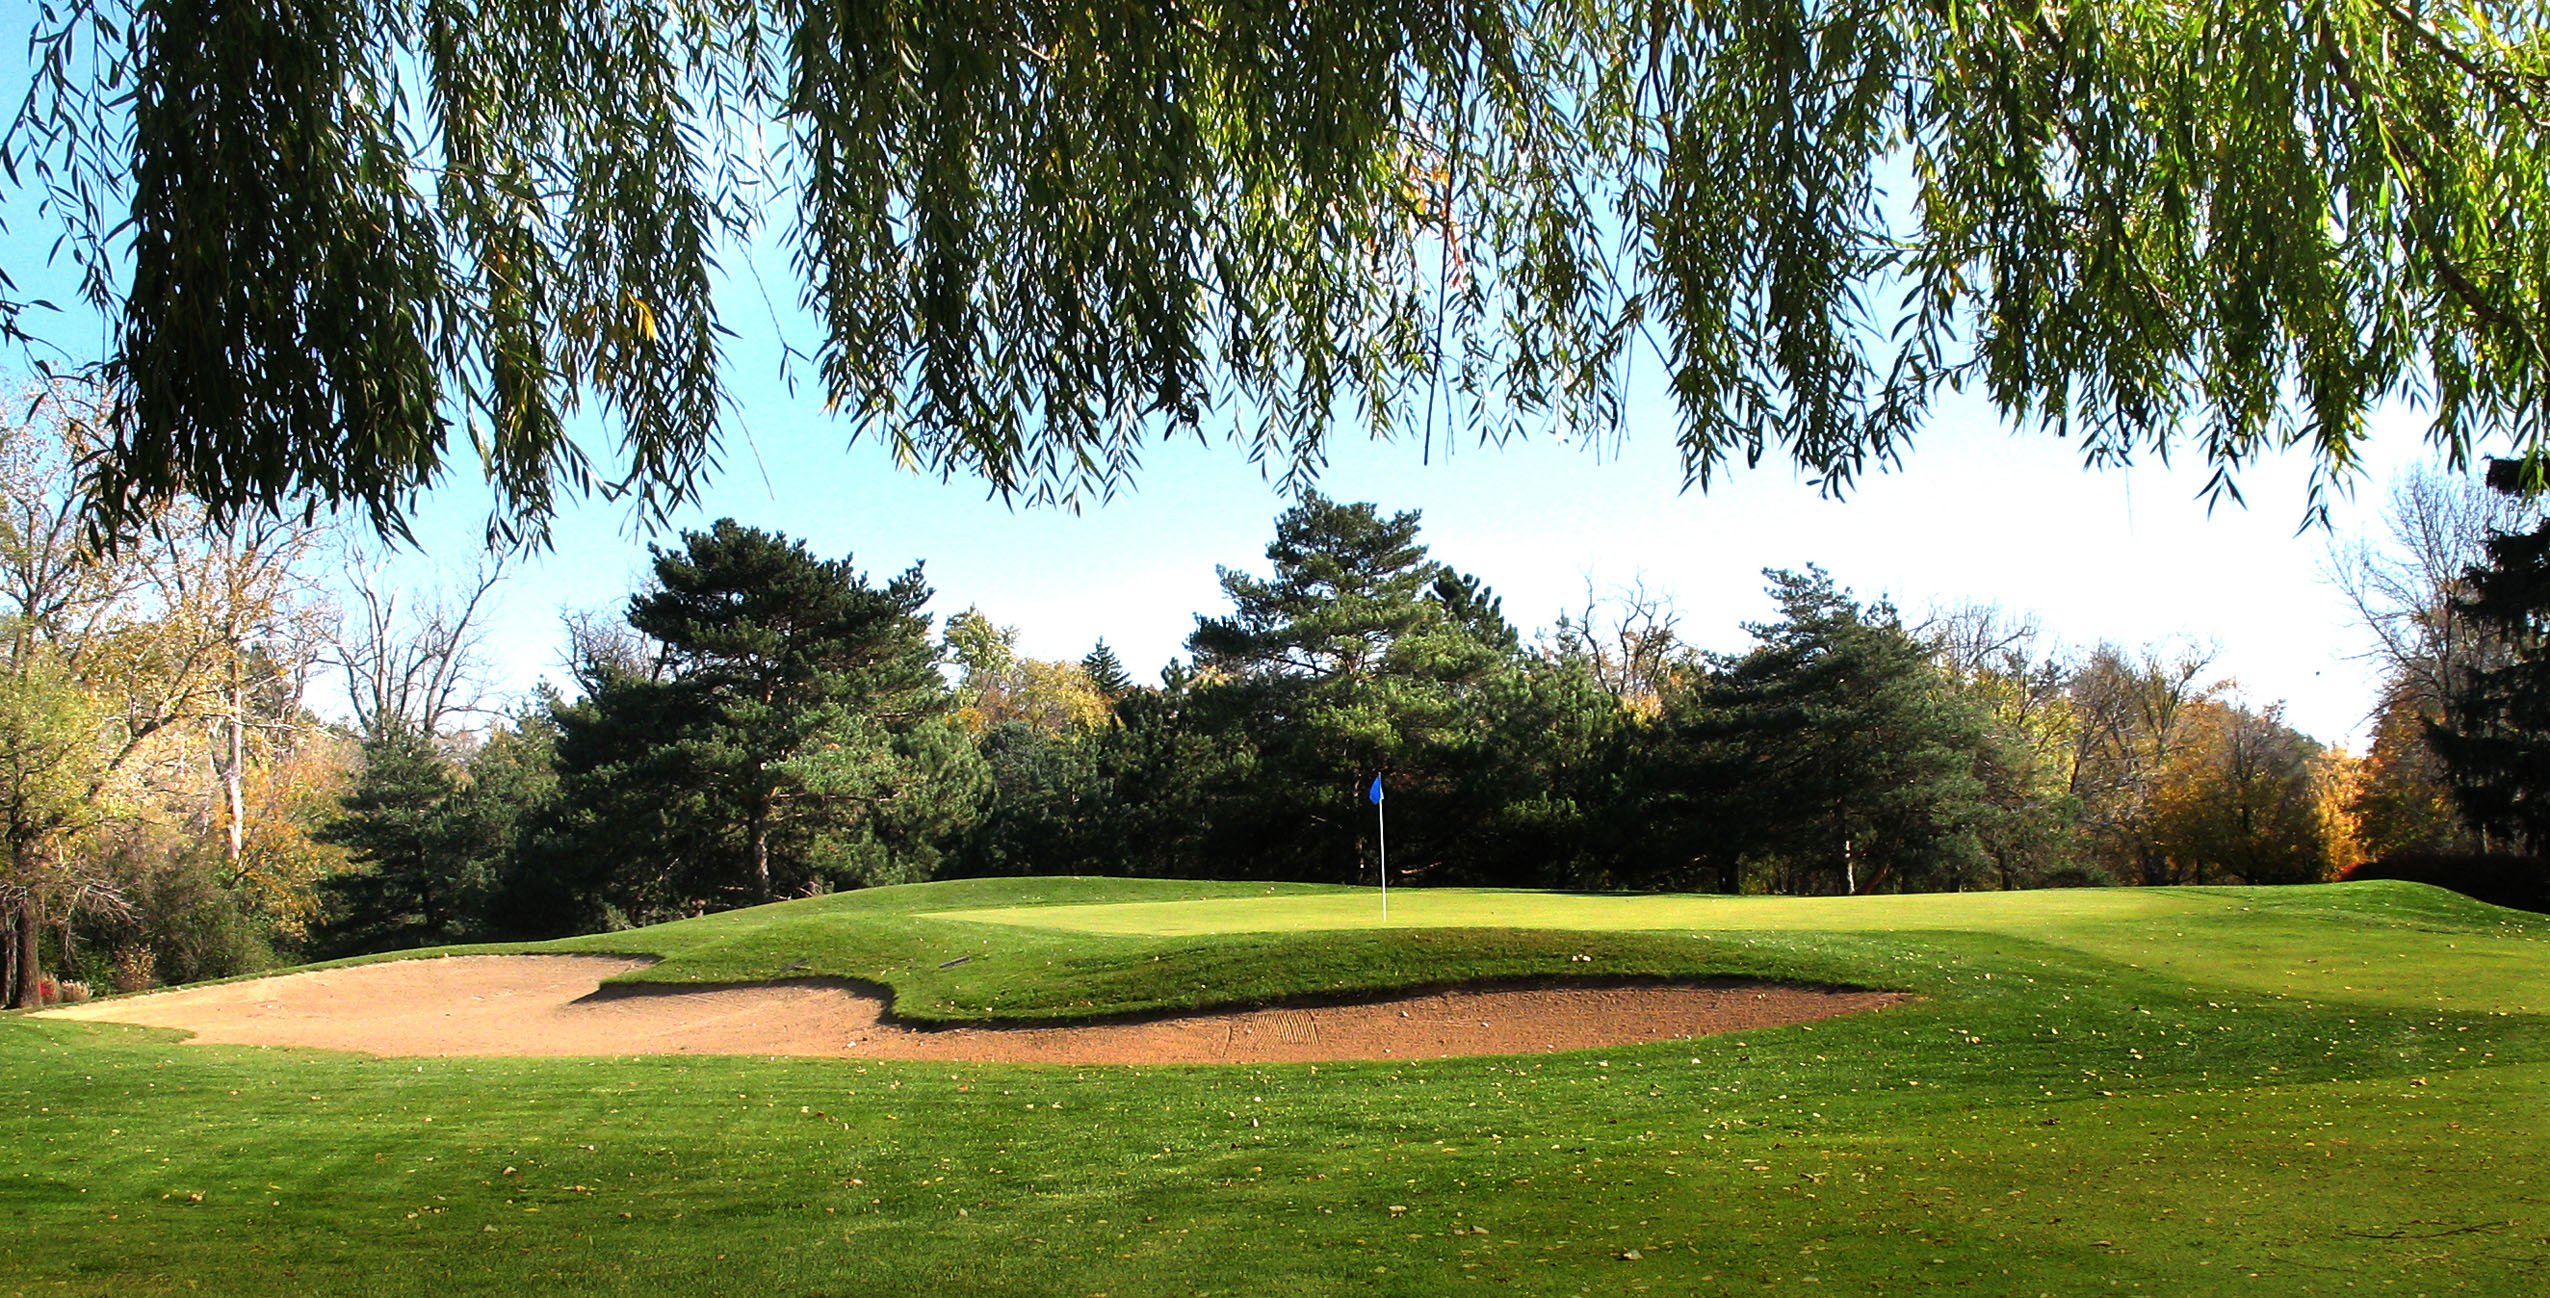 homepage image of golf course with willow tree in foreground